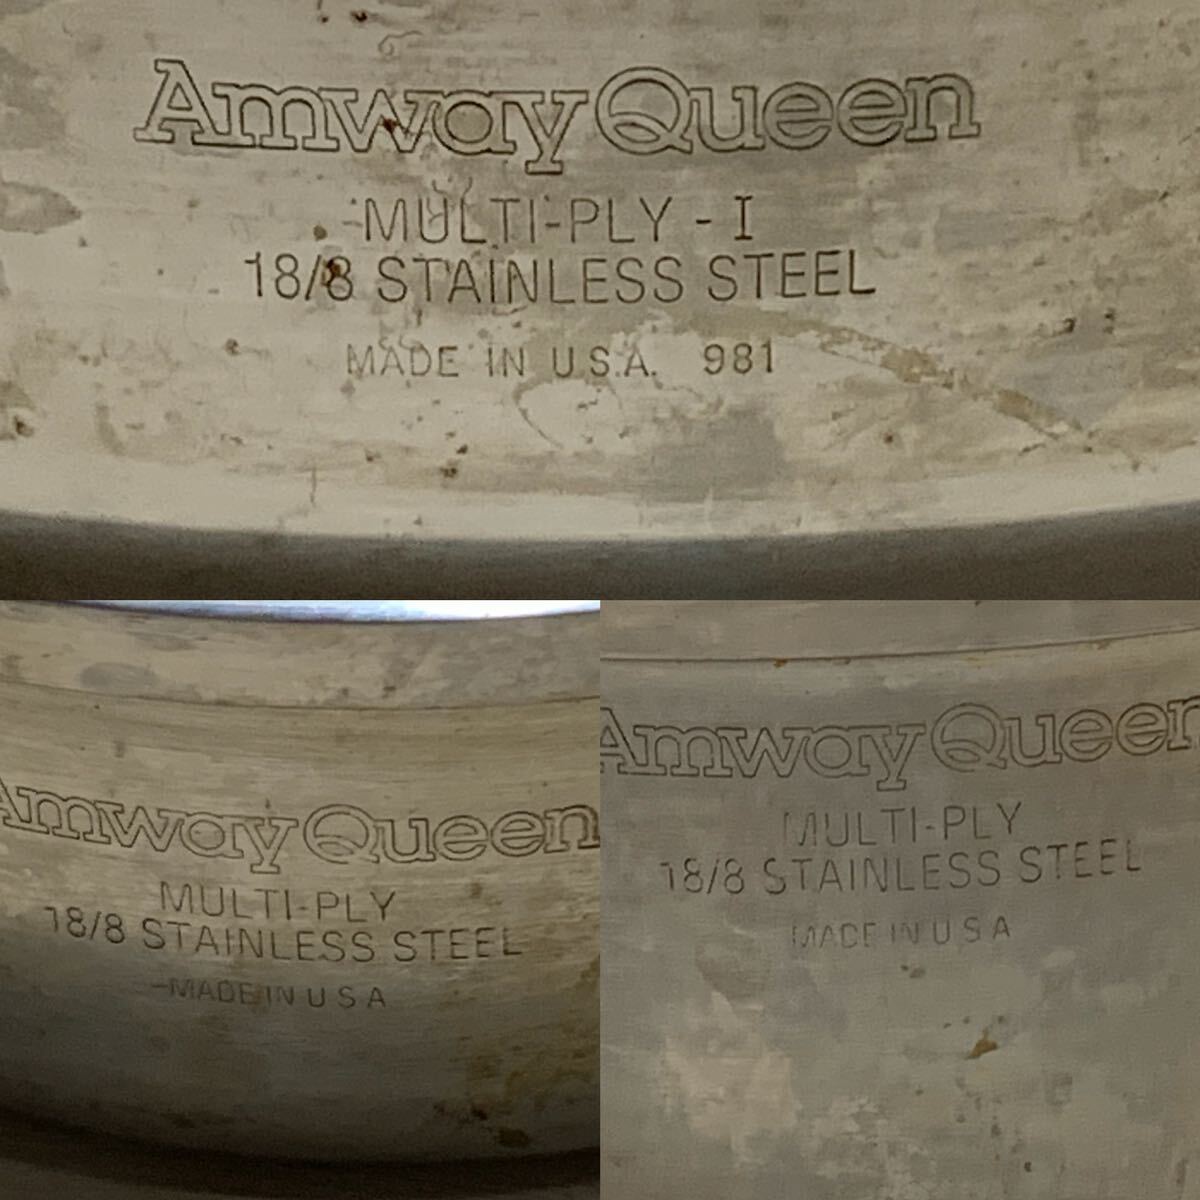 Amway Queen　アムウェイ　クイーン　MULTI-PLY-I　18/8 STAINLESS STEEL　両手鍋　片手鍋　U.S.A.製　3点セット_画像5